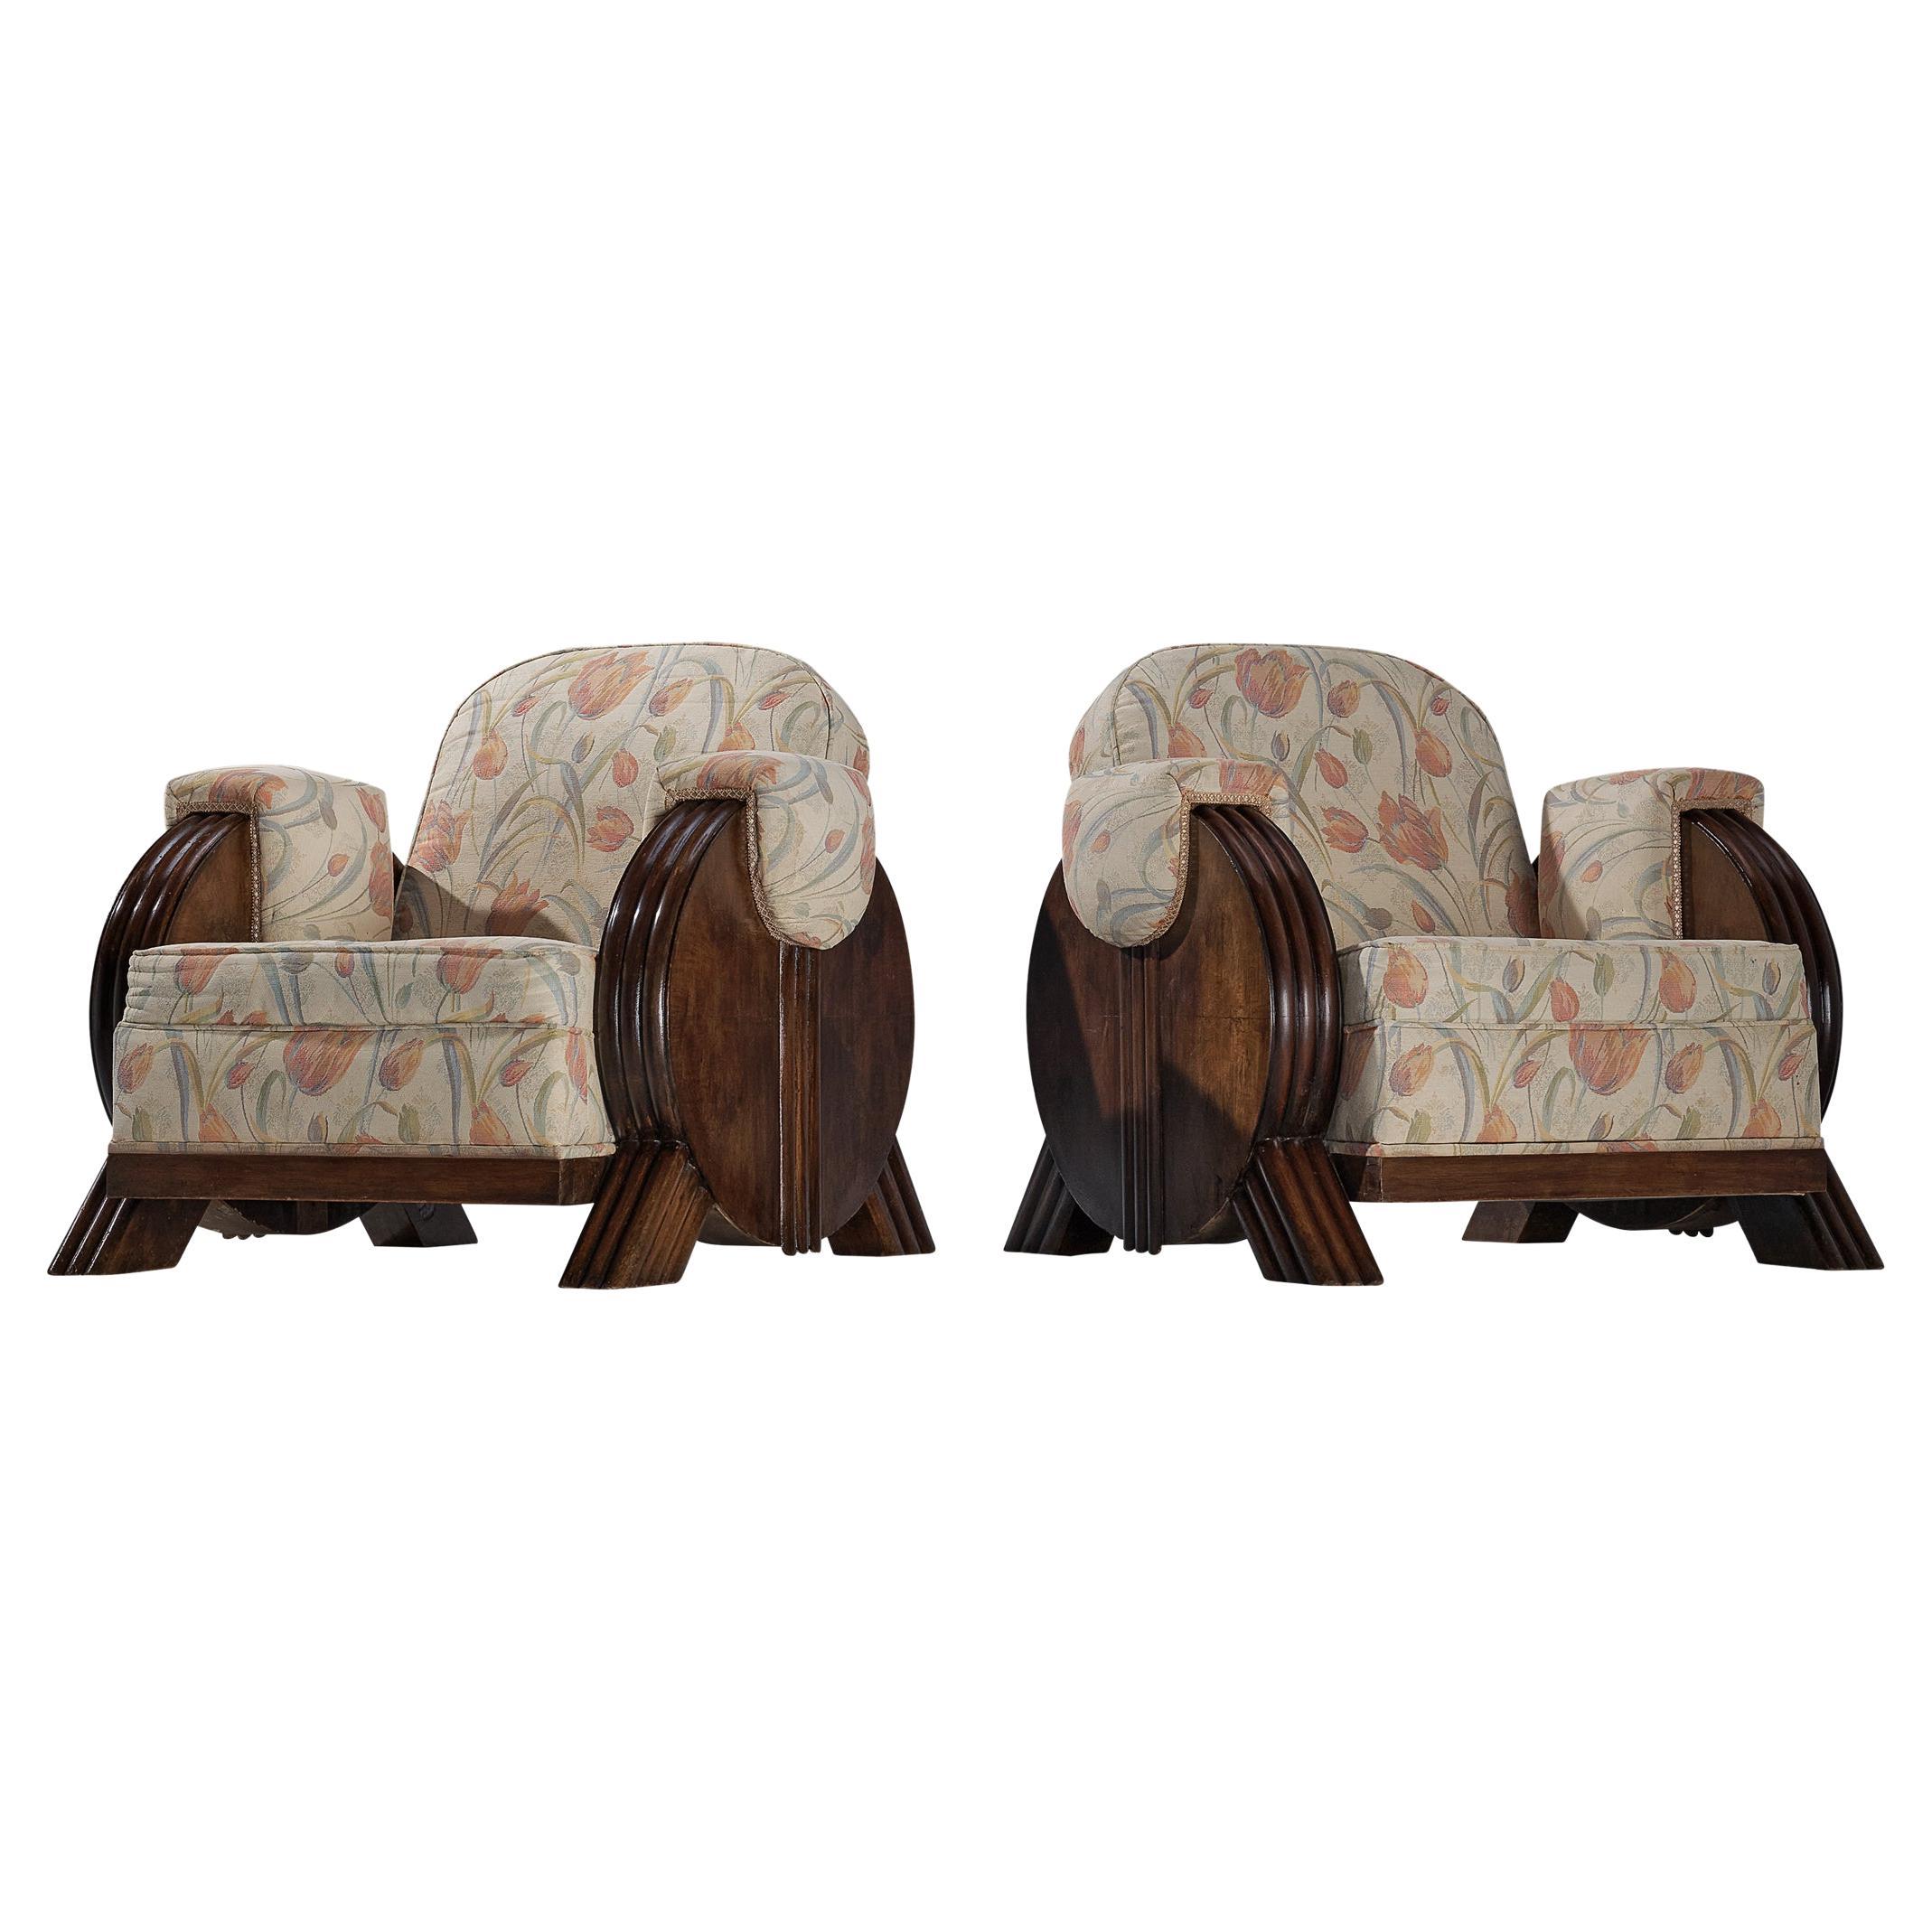 Italian Art Deco Pair of Lounge Chairs in Floral Upholstery and Wood